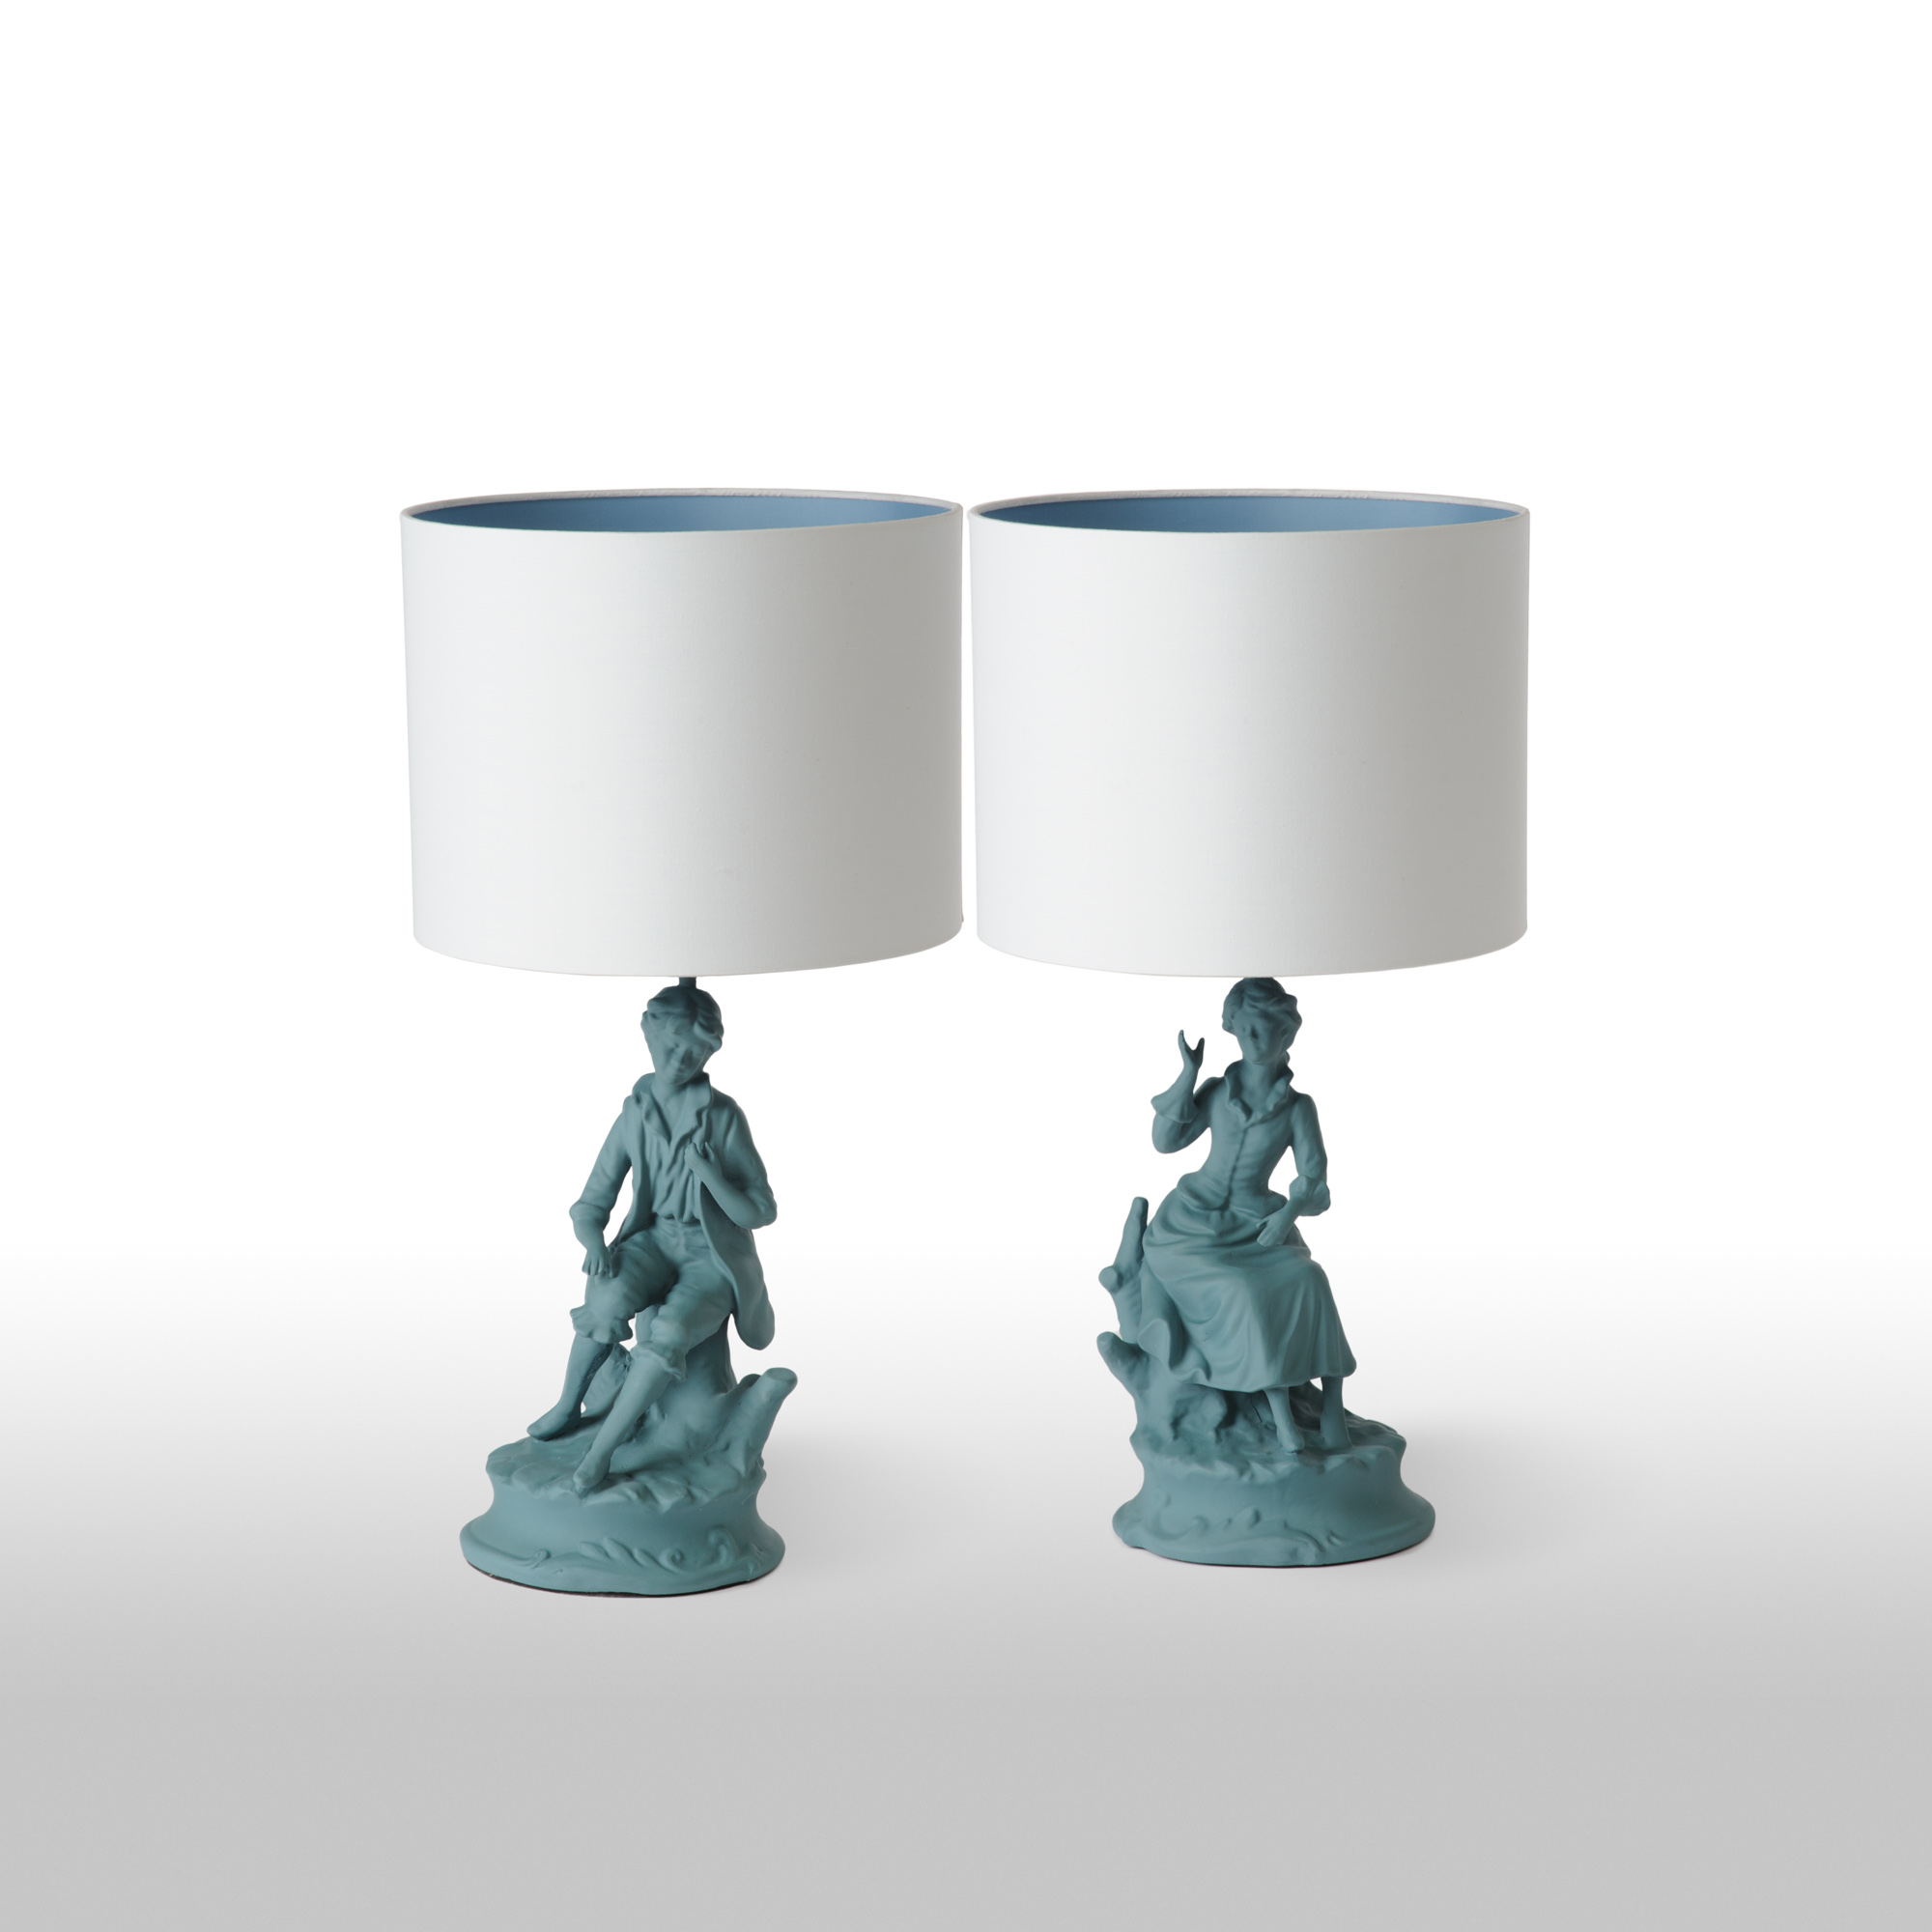 Teal boy and girl lamps from Barbara Cosgrove